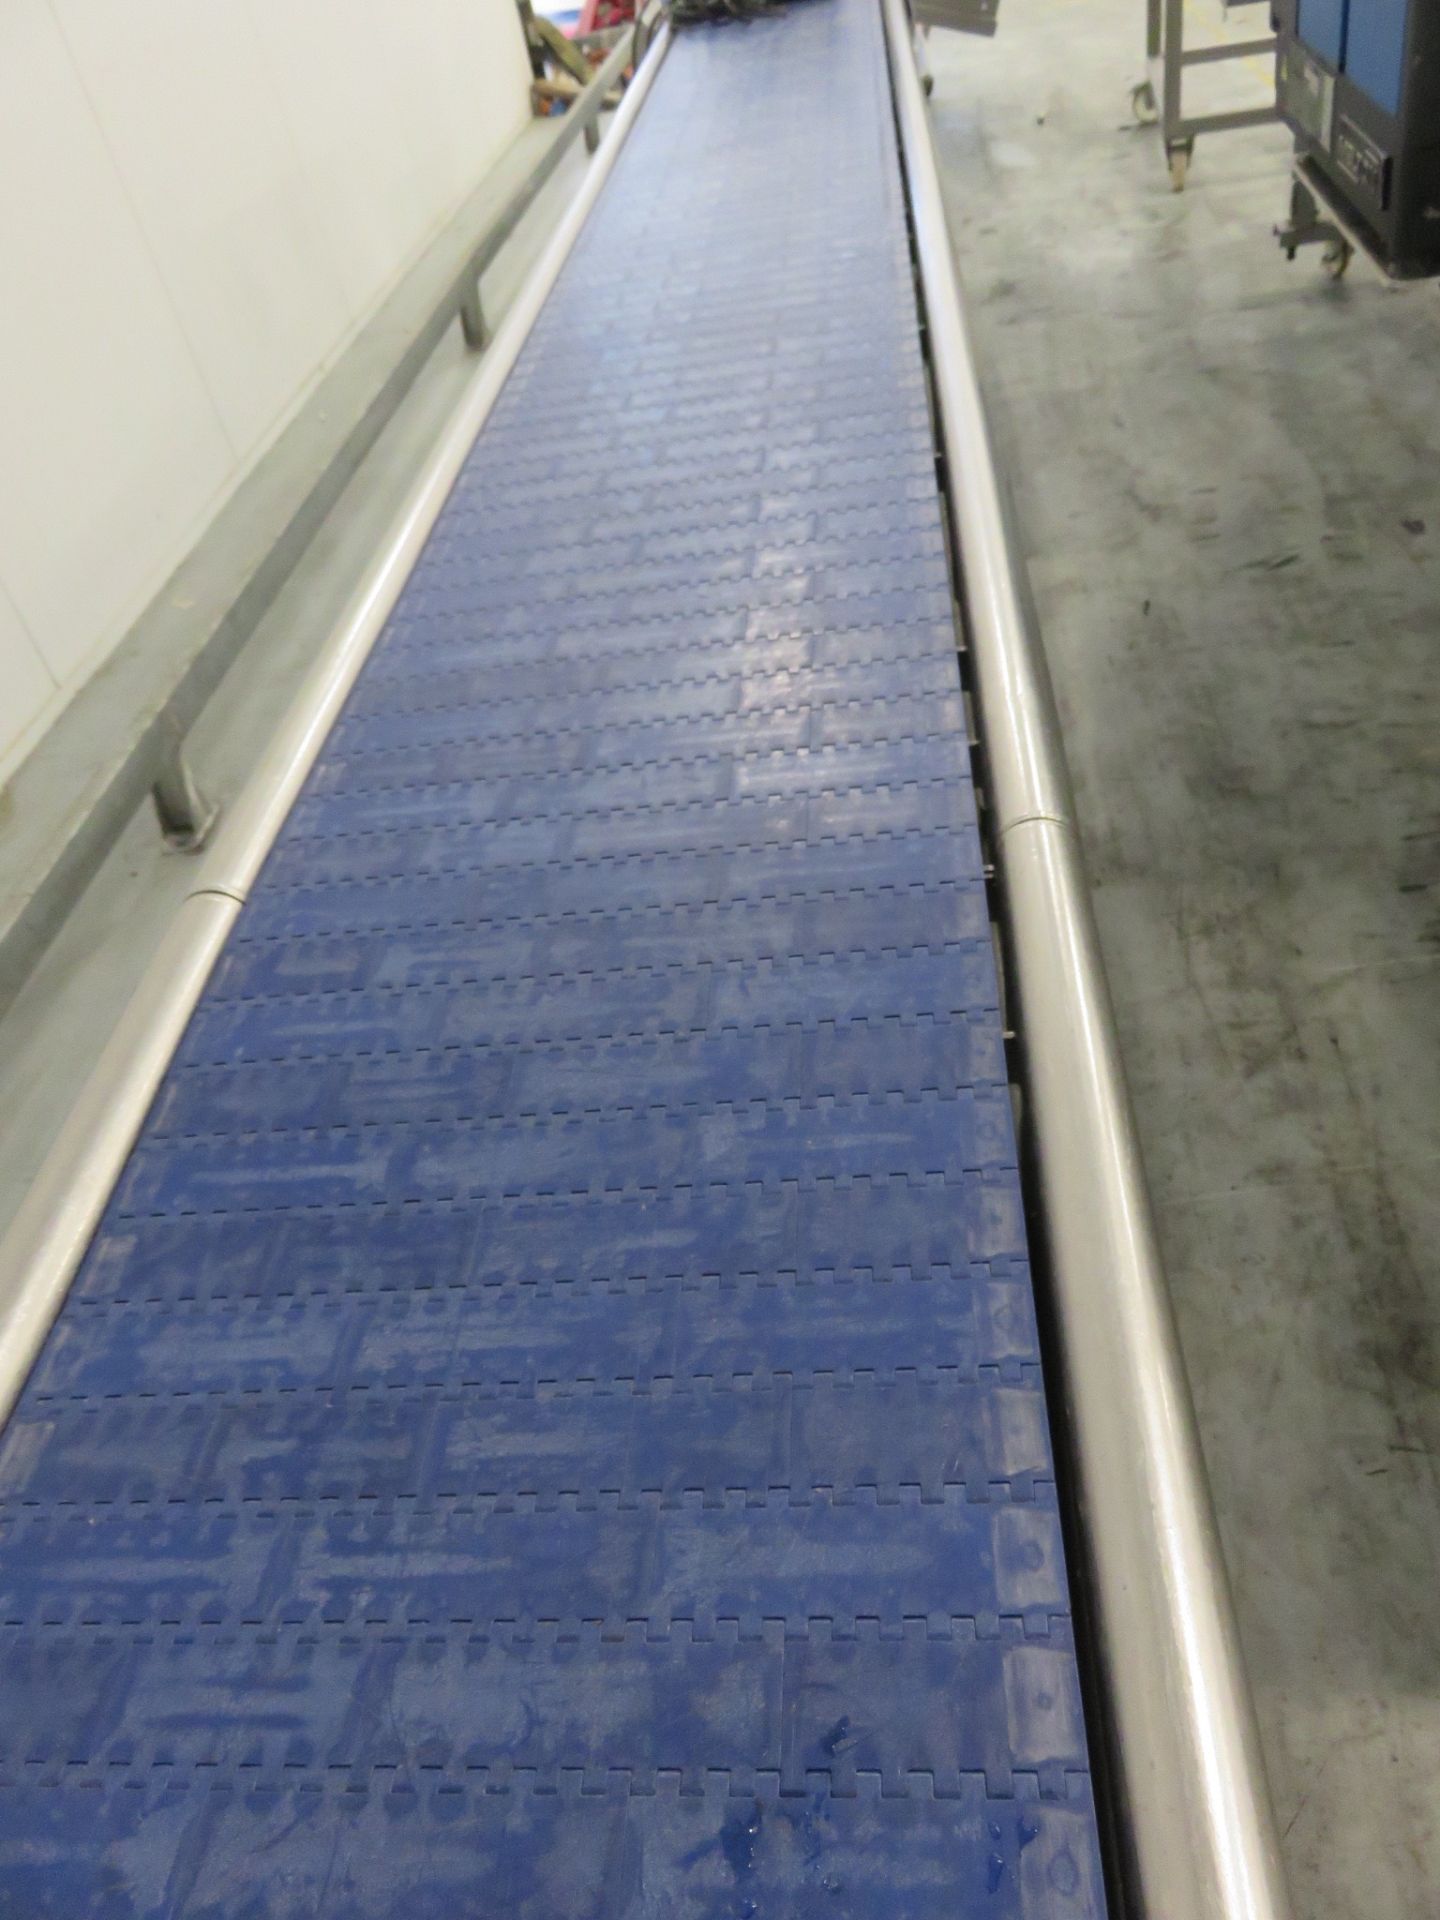 Syspal Pac Conveyor.Vari Speed. 460mm wide introlux belt x 6 mtr long.Totally S/LIFT OUT CHARGE £30 - Image 3 of 4